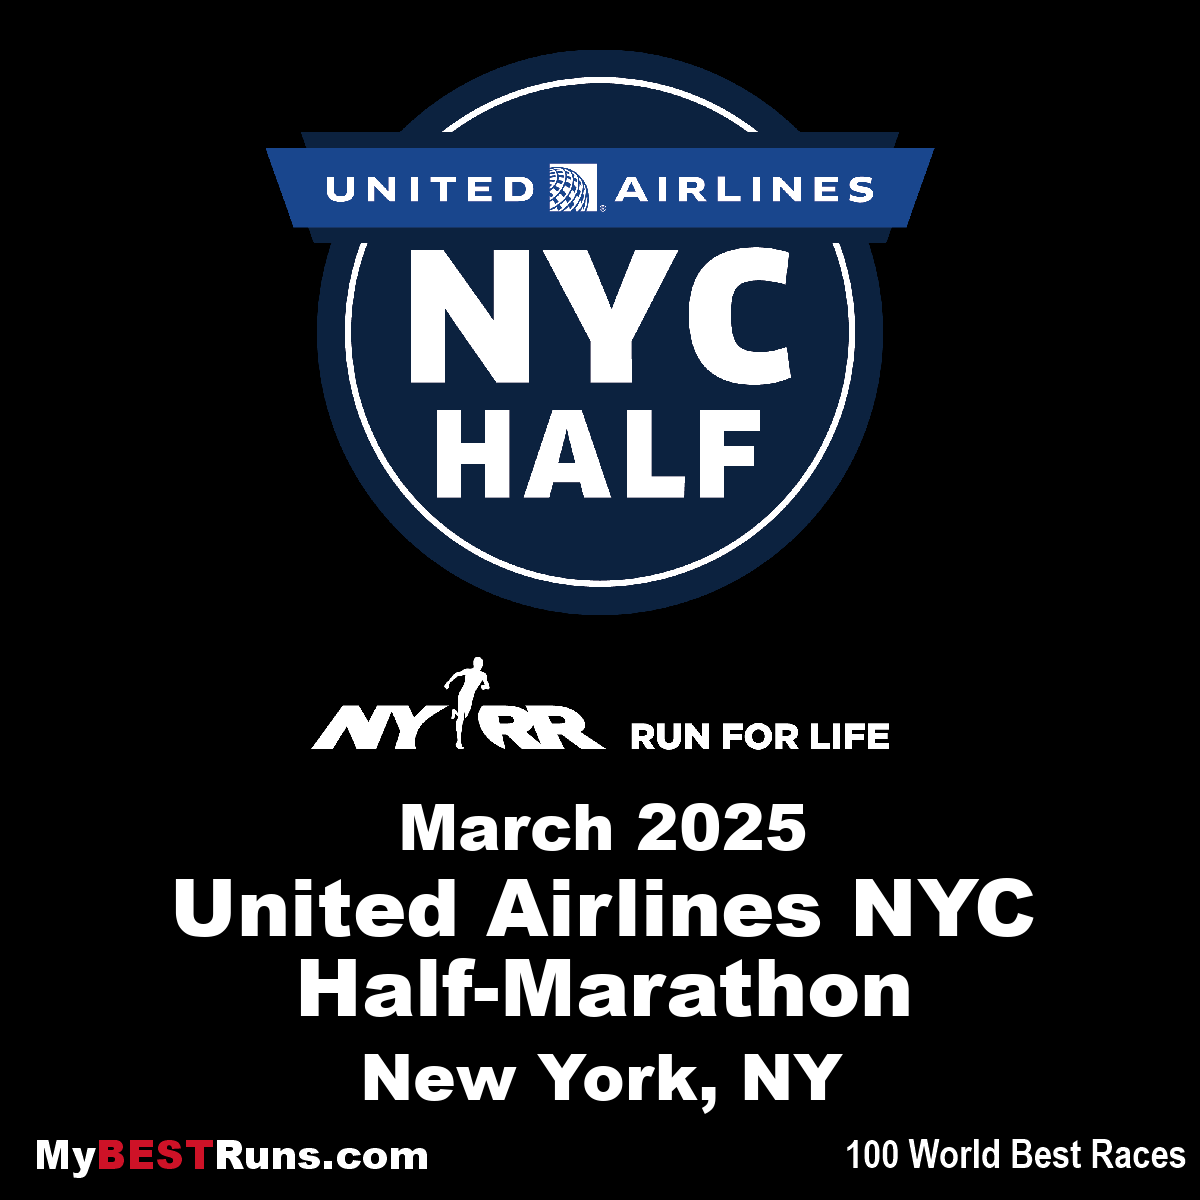 United Airlines NYC Half-Marathon Race Results - New York, NY - 3/20/2022 - My BEST Runs - Worlds Best Road Races